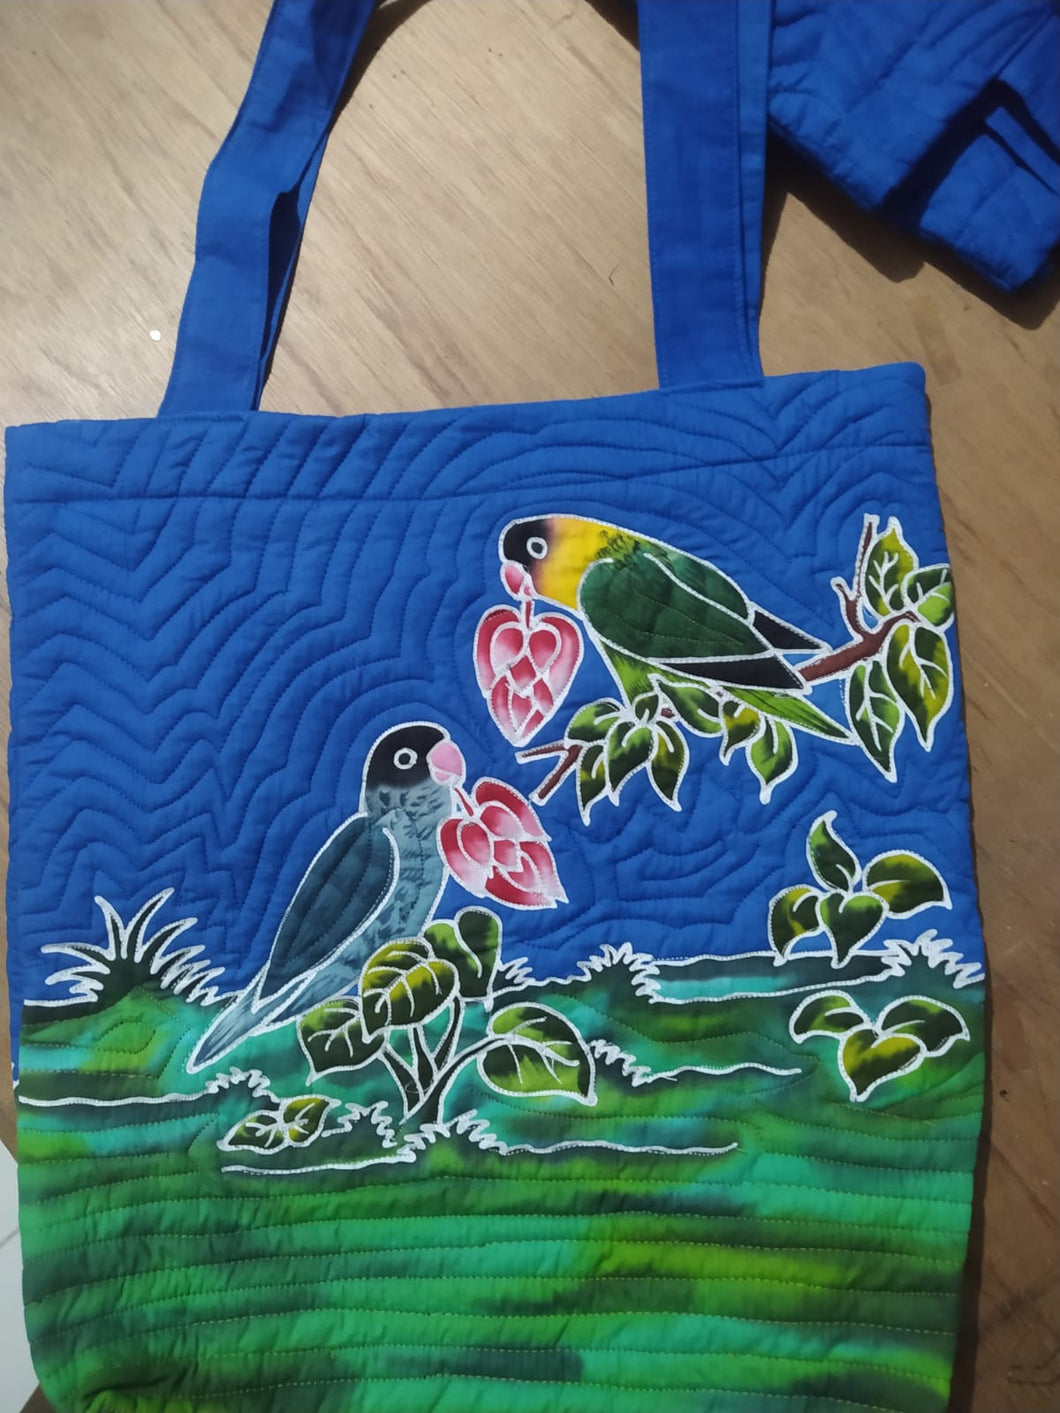 A normal Black-masked lovebird and a blue mutation each hold a heart-shaped red & white flower in their beak. One is perched on a branch, the other standing on varied green groundcover. This handpainted batik bag has blue shoulder straps matching the color of the sky.